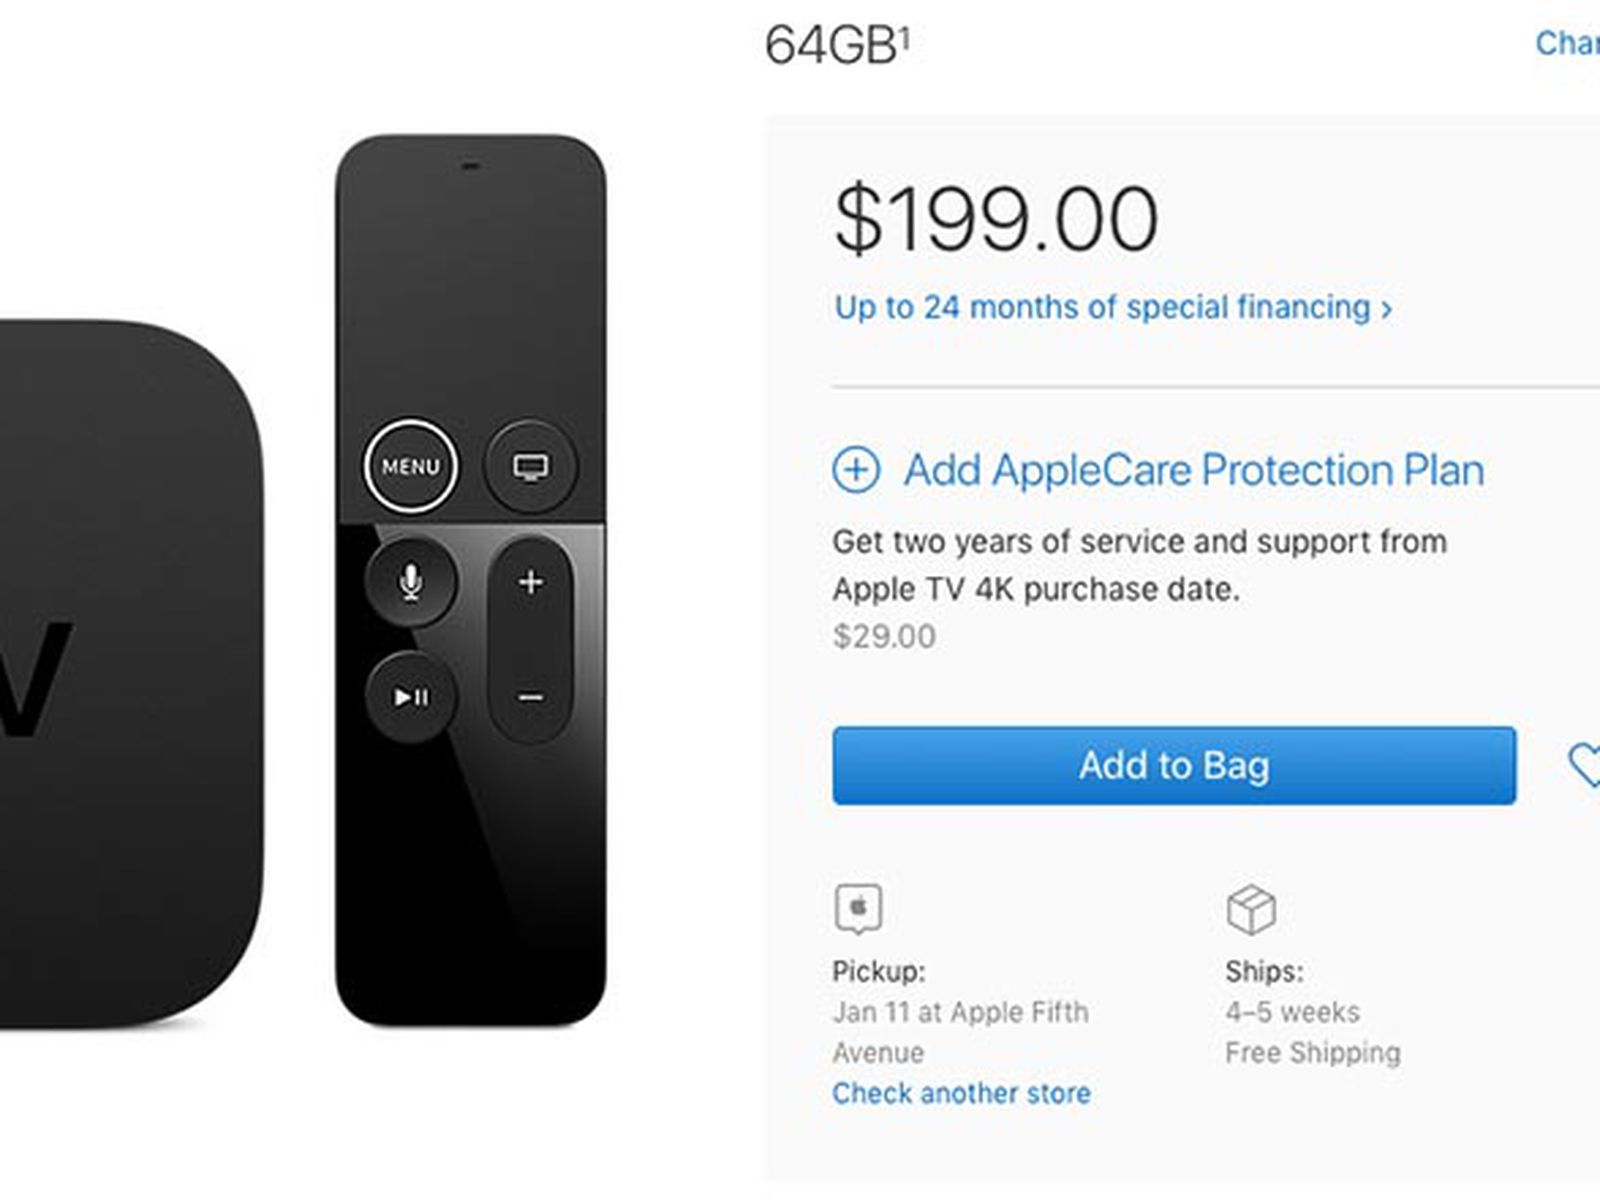 Apple TV 4K With 64GB Storage Faces 4-5 Week Shipping Delay - MacRumors